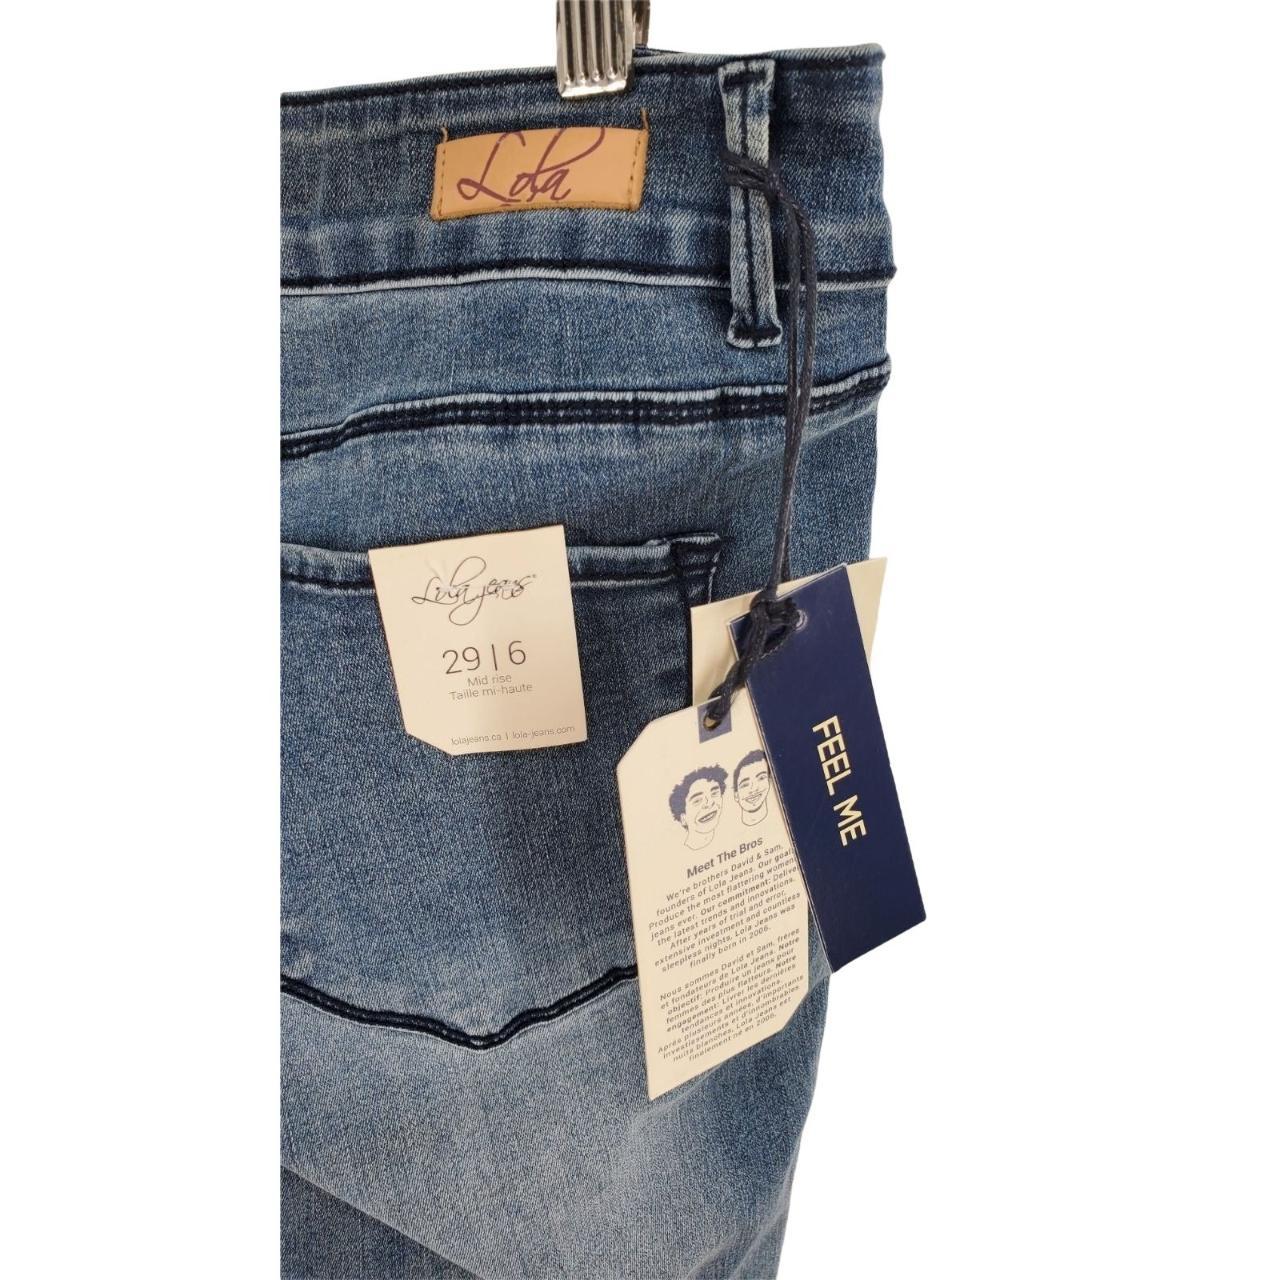 Product Image 3 - LOLA JEANS $98

Women's Size: 6